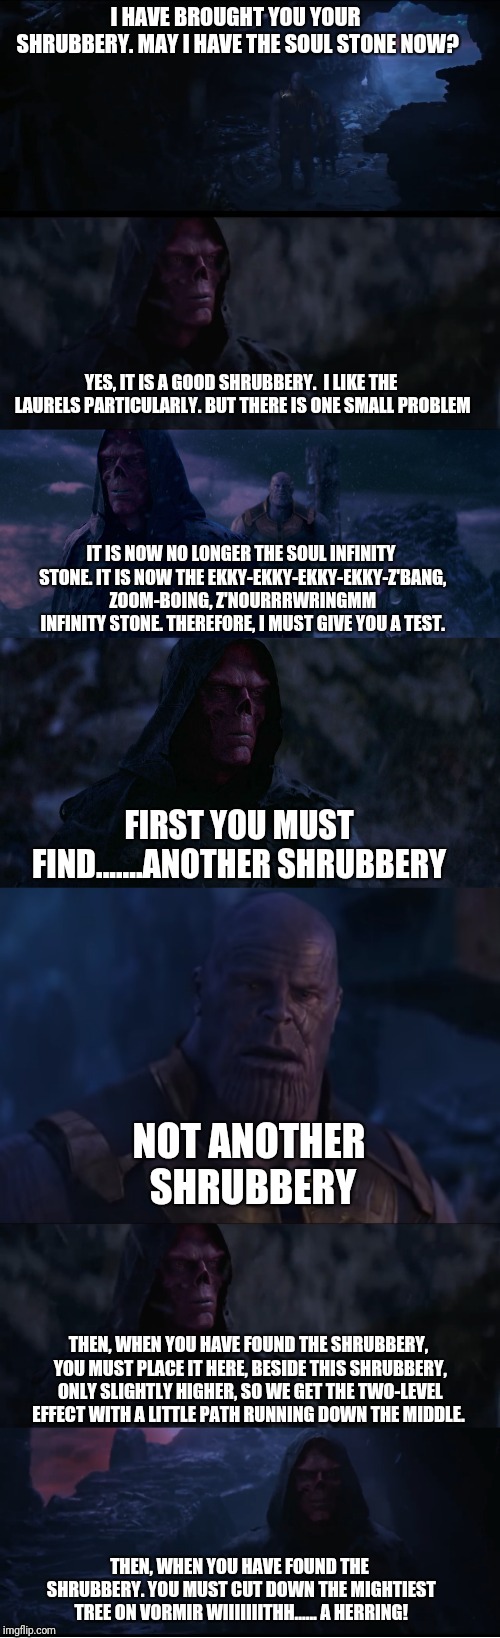 Thanos and the Infinity Grail- The Soul Stone continued  | I HAVE BROUGHT YOU YOUR SHRUBBERY. MAY I HAVE THE SOUL STONE NOW? YES, IT IS A GOOD SHRUBBERY.  I LIKE THE LAURELS PARTICULARLY. BUT THERE IS ONE SMALL PROBLEM; IT IS NOW NO LONGER THE SOUL INFINITY STONE. IT IS NOW THE EKKY-EKKY-EKKY-EKKY-Z'BANG, ZOOM-BOING, Z'NOURRRWRINGMM INFINITY STONE. THEREFORE, I MUST GIVE YOU A TEST. FIRST YOU MUST FIND.......ANOTHER SHRUBBERY; NOT ANOTHER SHRUBBERY; THEN, WHEN YOU HAVE FOUND THE SHRUBBERY, YOU MUST PLACE IT HERE, BESIDE THIS SHRUBBERY, ONLY SLIGHTLY HIGHER, SO WE GET THE TWO-LEVEL EFFECT WITH A LITTLE PATH RUNNING DOWN THE MIDDLE. THEN, WHEN YOU HAVE FOUND THE SHRUBBERY. YOU MUST CUT DOWN THE MIGHTIEST TREE ON VORMIR WIIIIIIITHH...... A HERRING! | image tagged in thanos,avengers infinity war,monty python and the holy grail,marvel,marvel comics,monty python | made w/ Imgflip meme maker